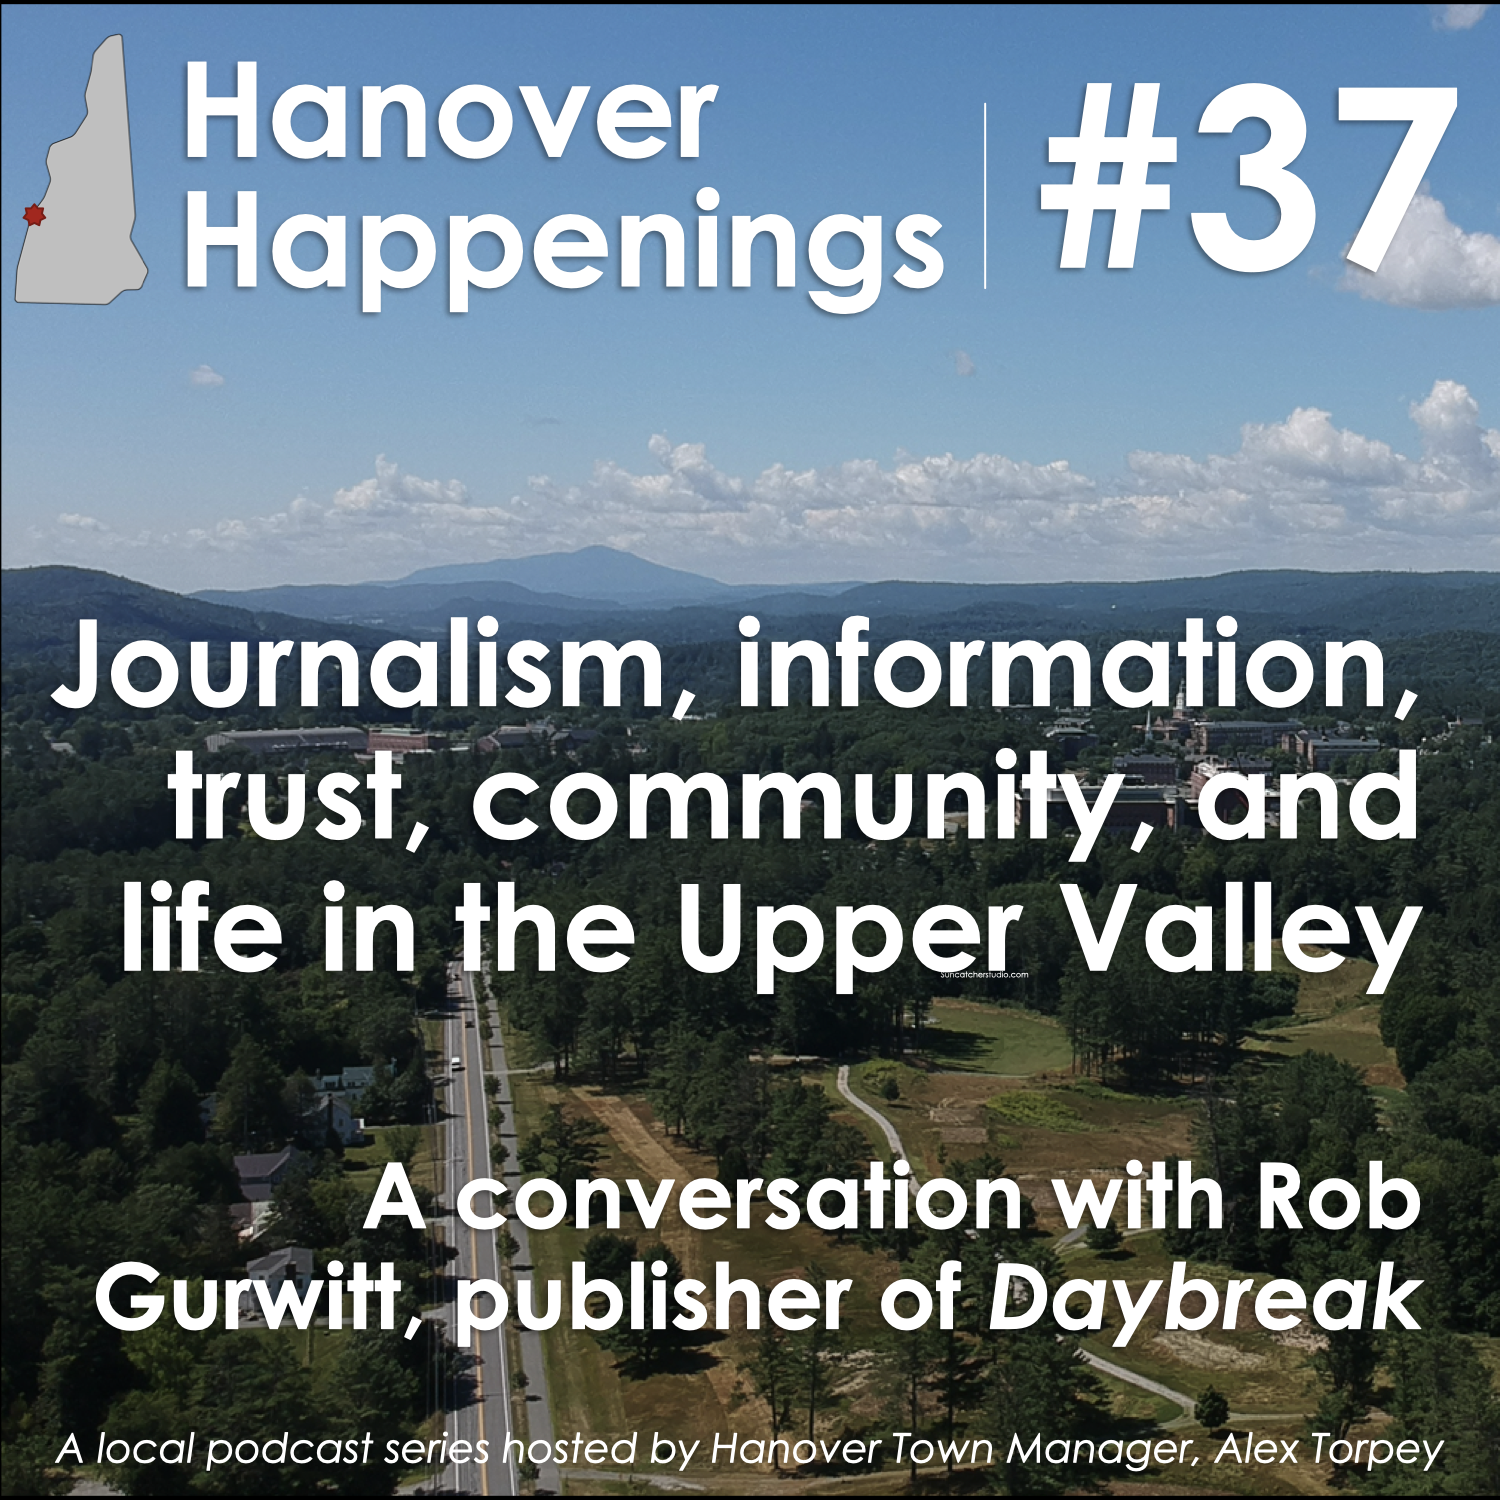 A conversation with Rob Gurwitt of Daybreak, about news, trust, New England democracy, community, and more